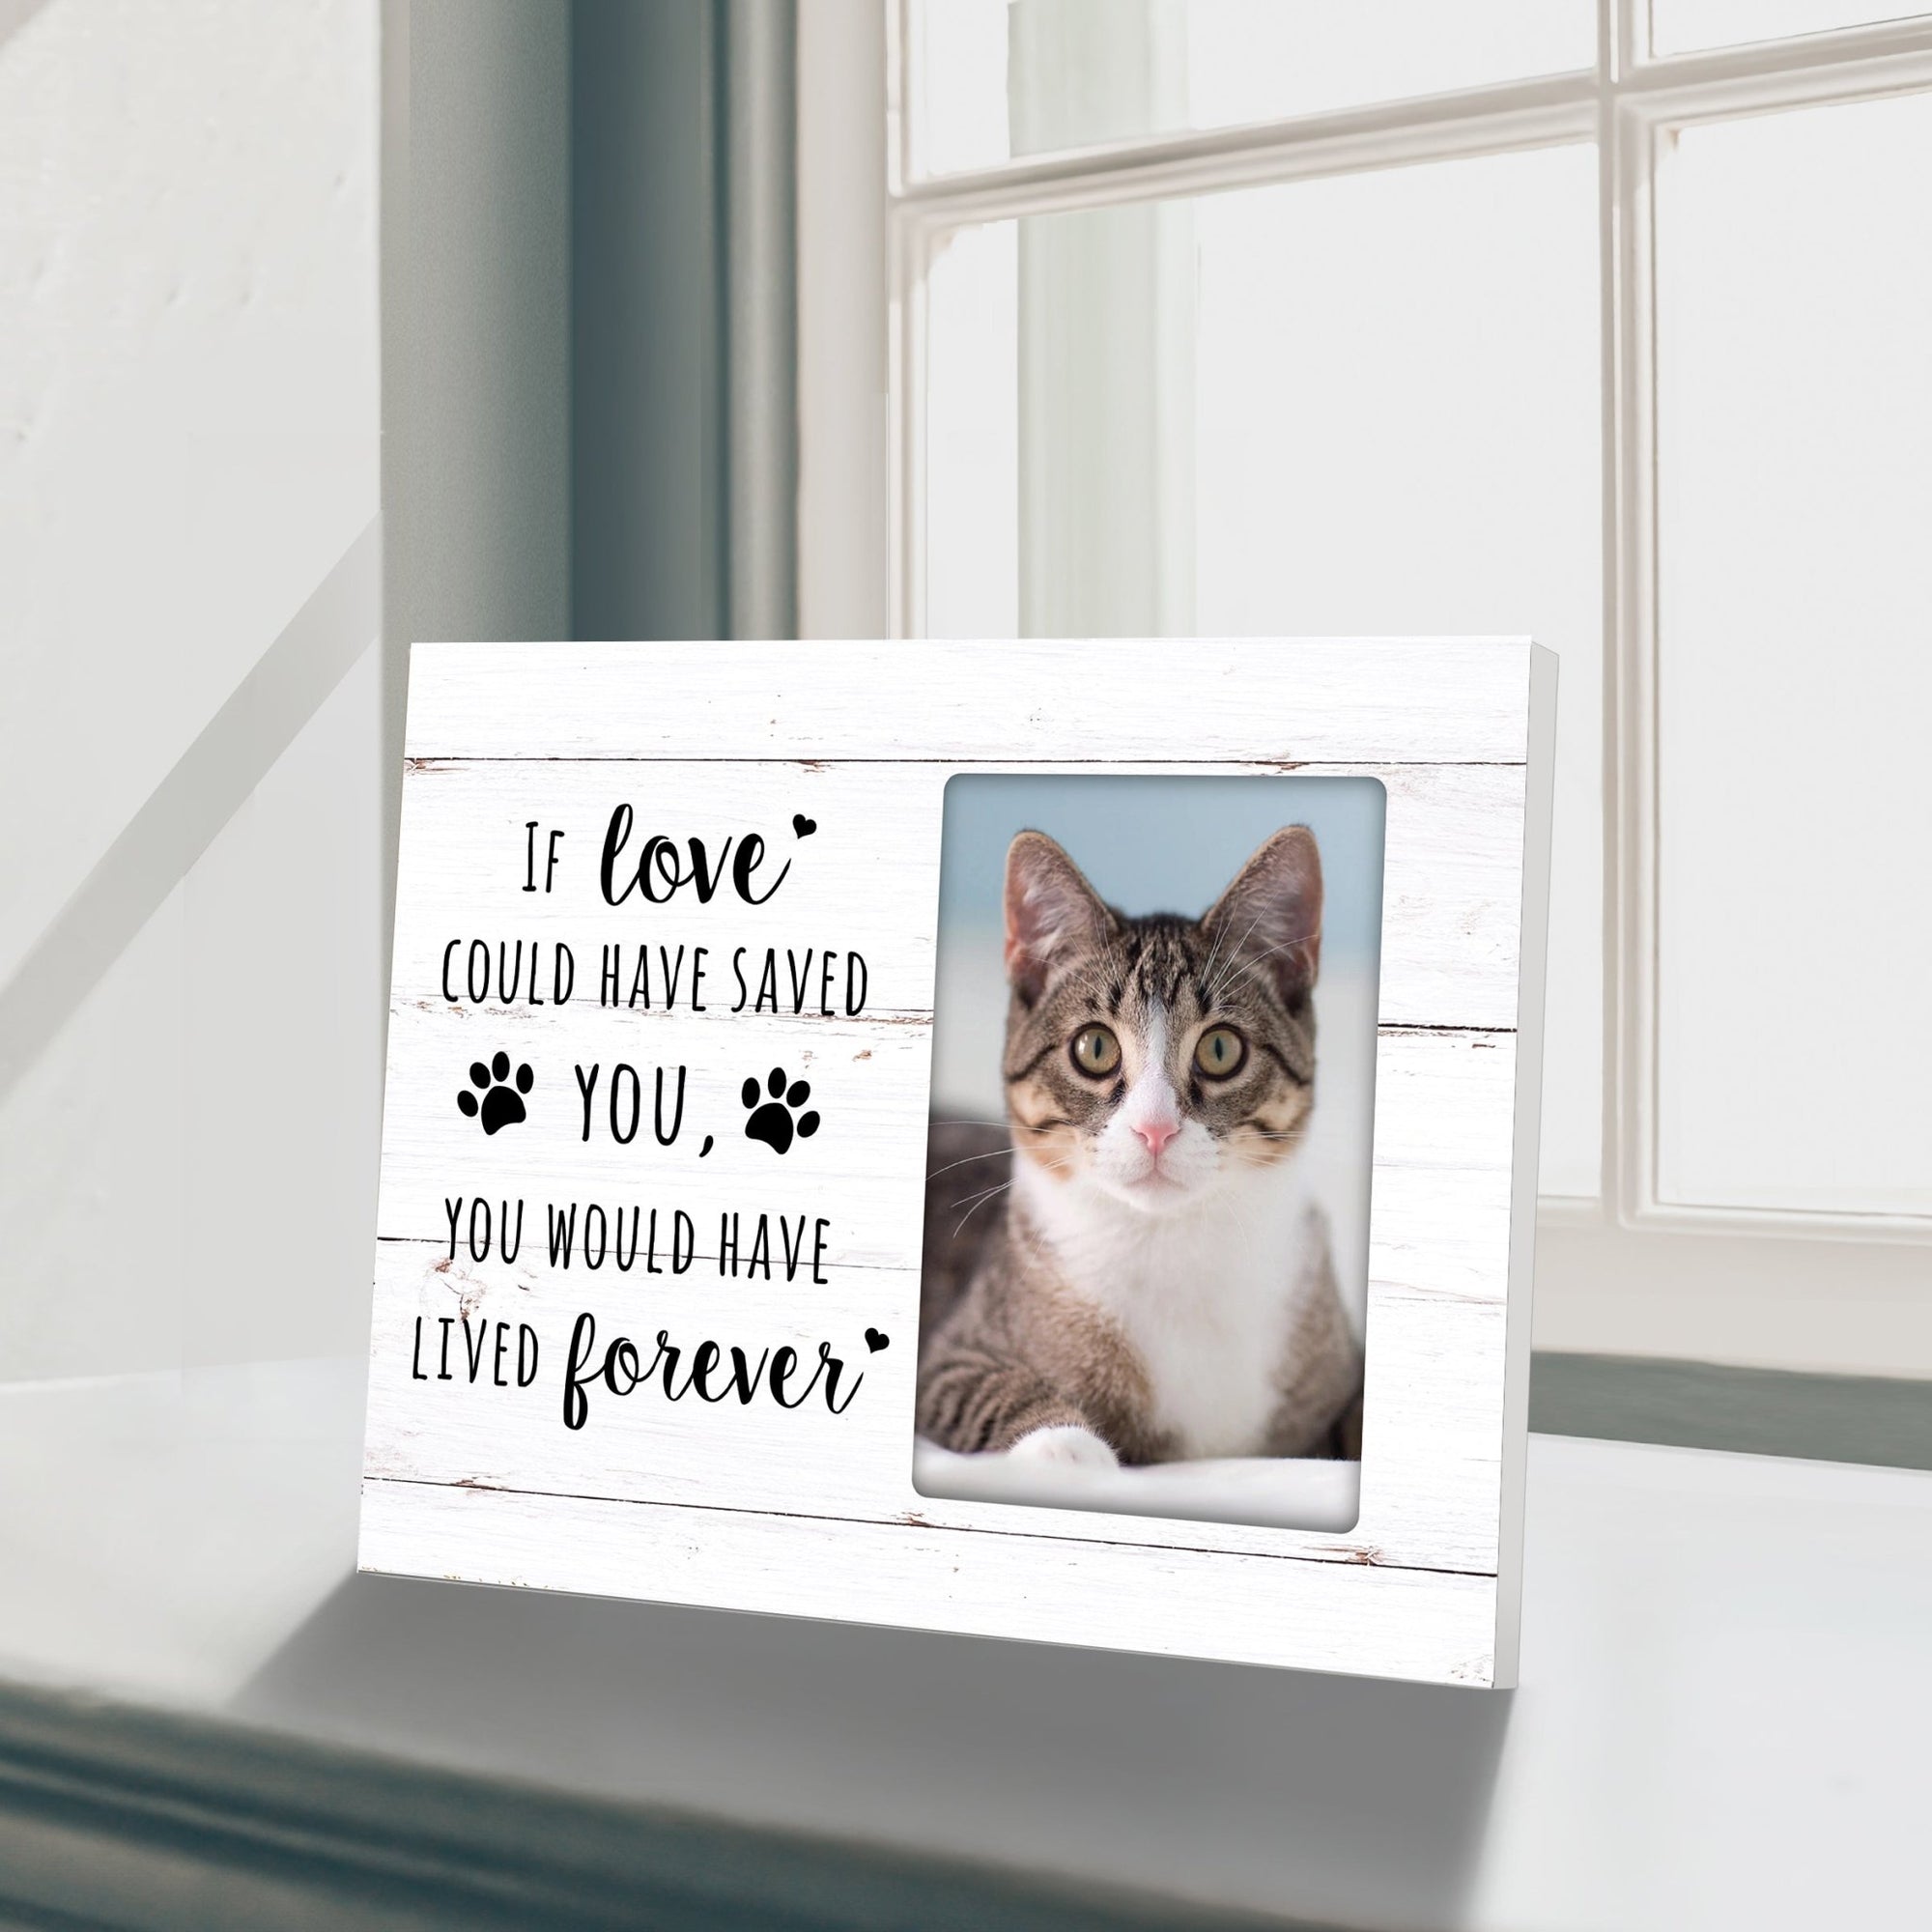 Rustic-Inspired Wooden Pet Memorial Frames That Holds A 4x6in Photo - If Love Could Have Saved You - LifeSong Milestones